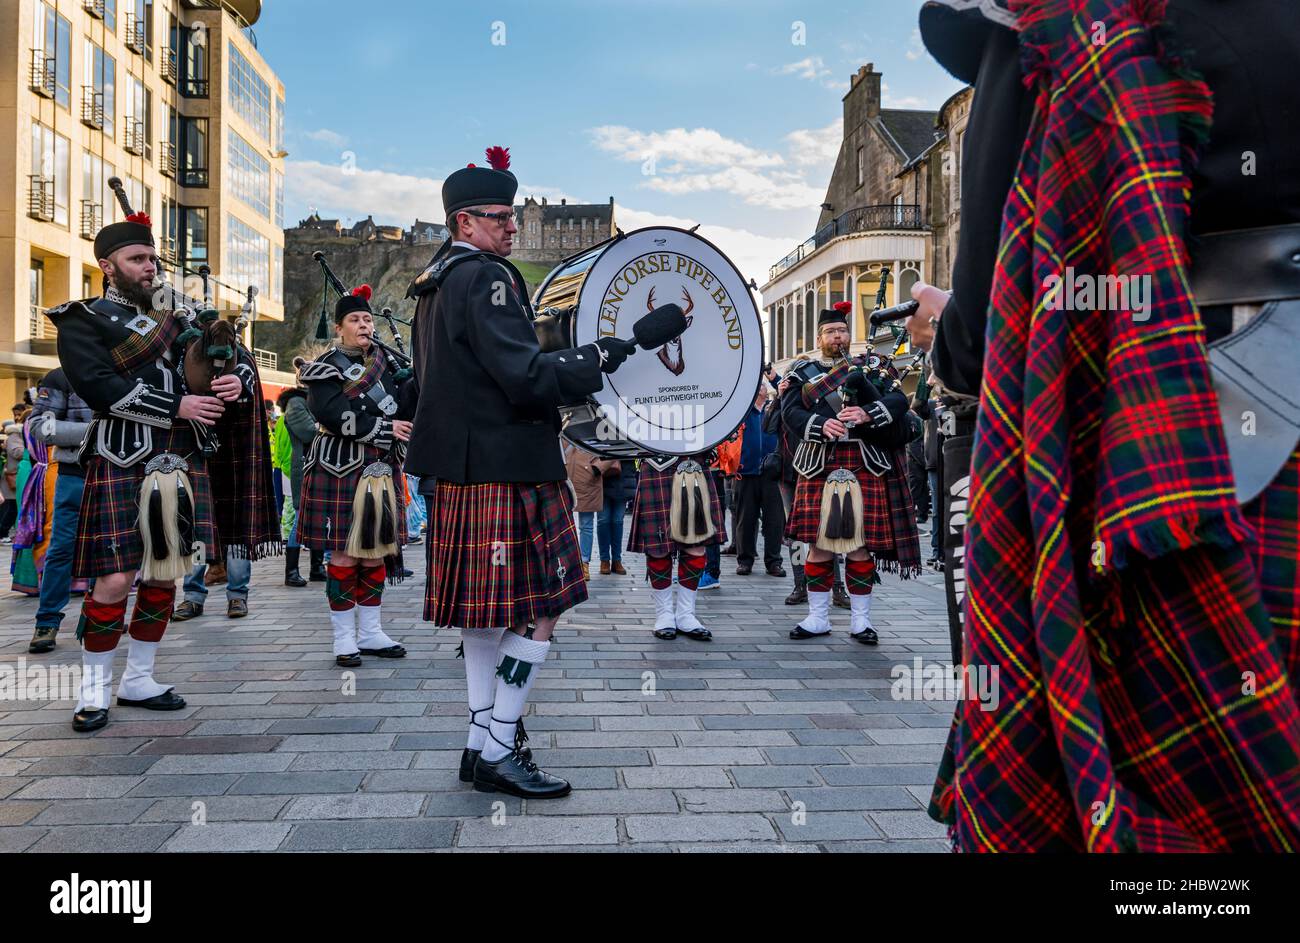 Scottish pipe band with man beating drum and bagpipe players at Diwali festival event with Edinburgh castle backdrop, Edinburgh, Scotland, UK Stock Photo